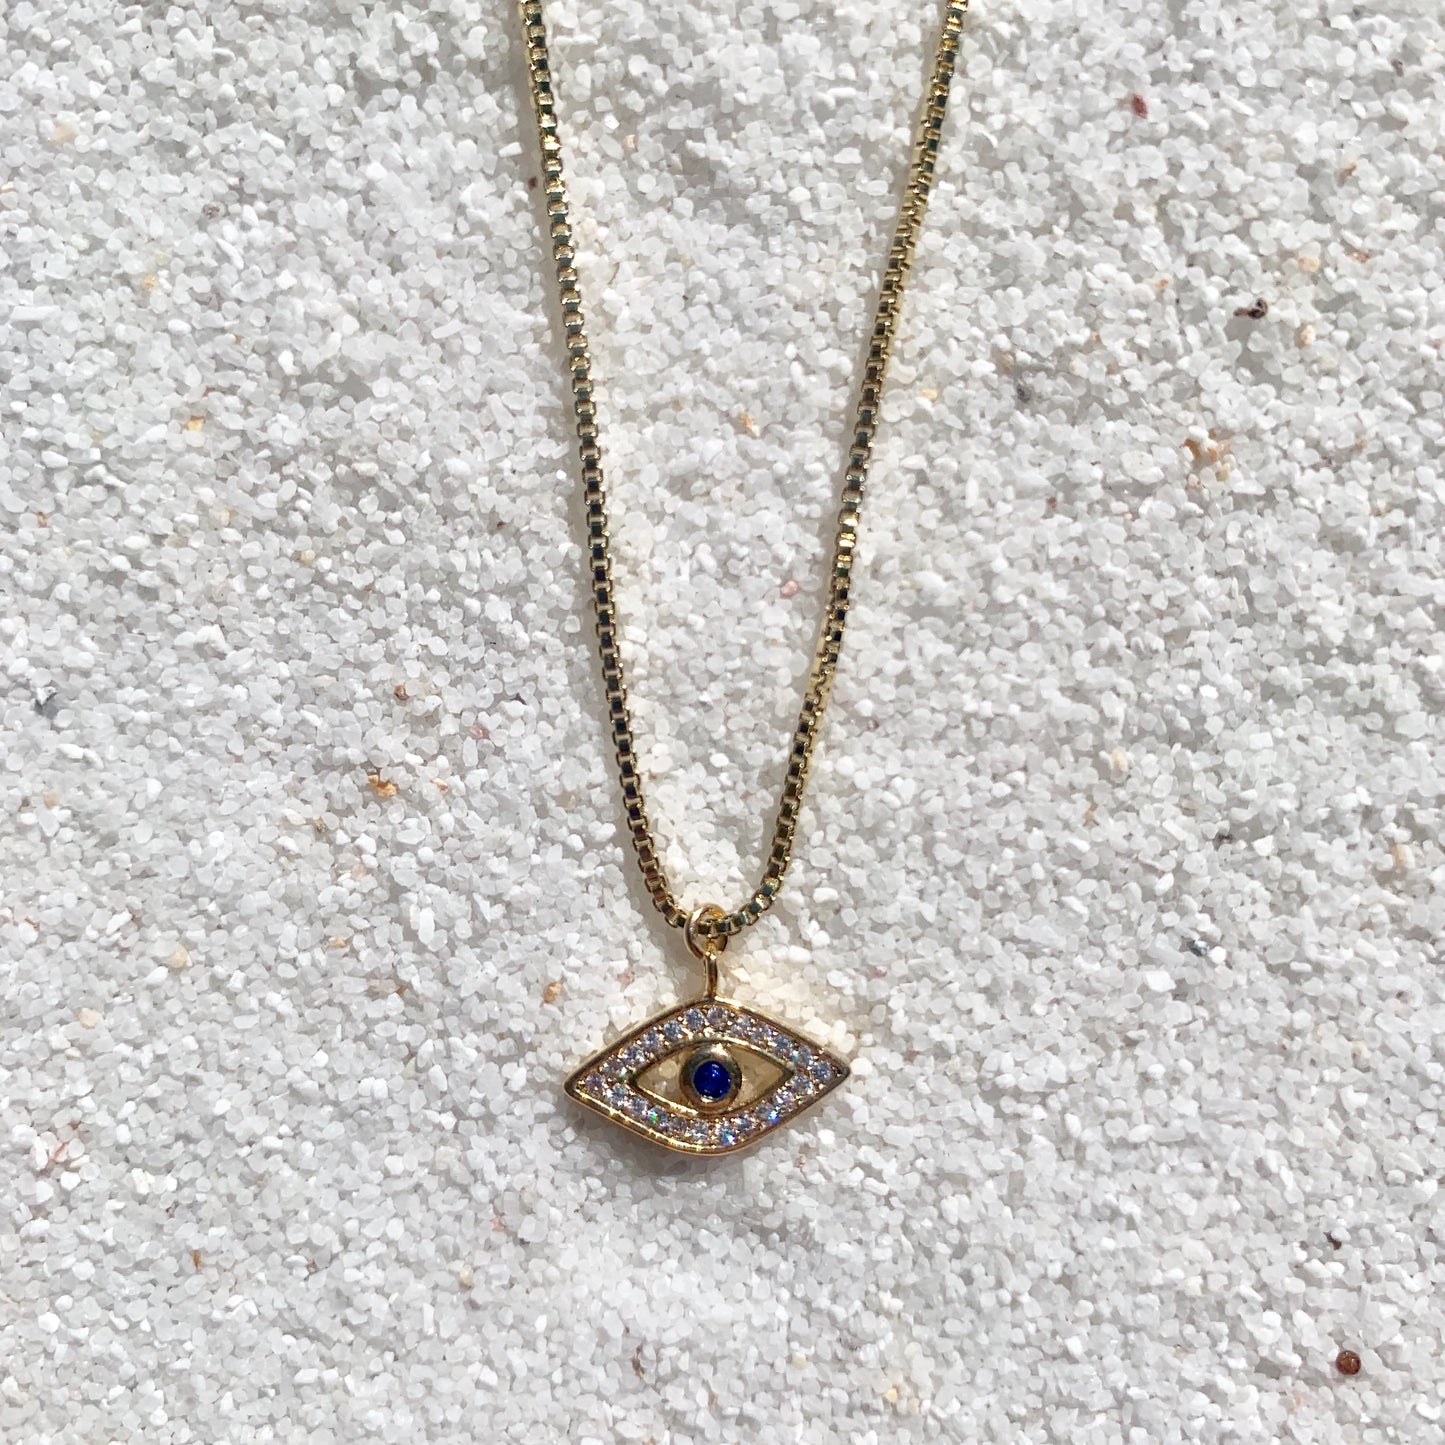 Rhiannon Necklace - 14k Gold Filled Chain and Evil Eye Charm Necklace-Au+ORA